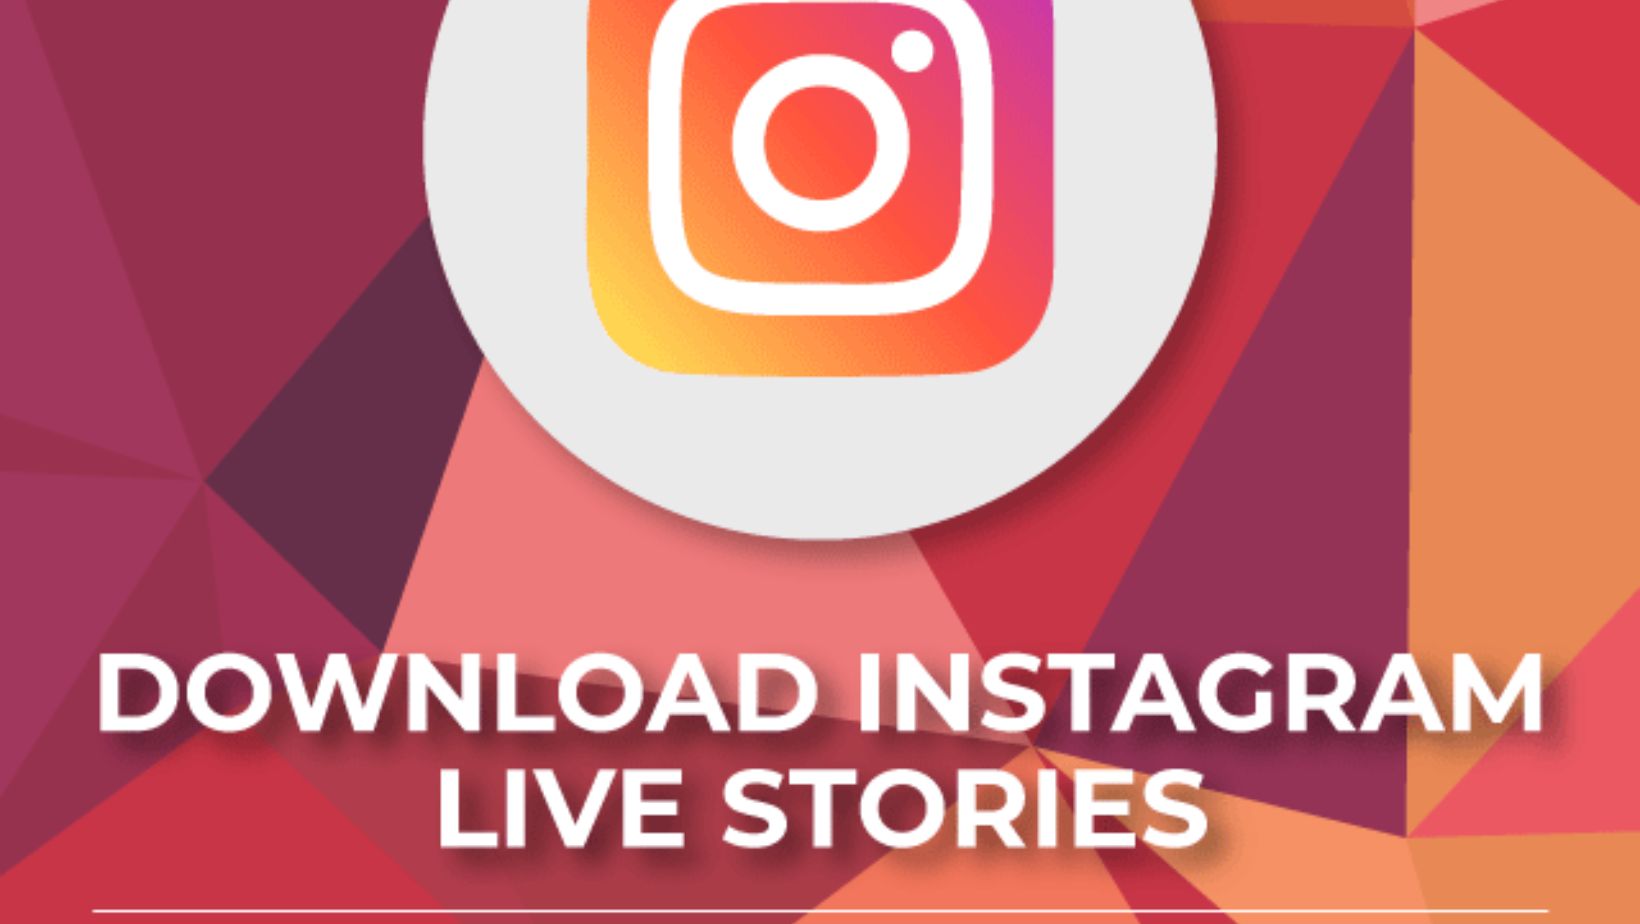 Pengunduh Story Instagram: The Best Tools to Save Stories Quickly